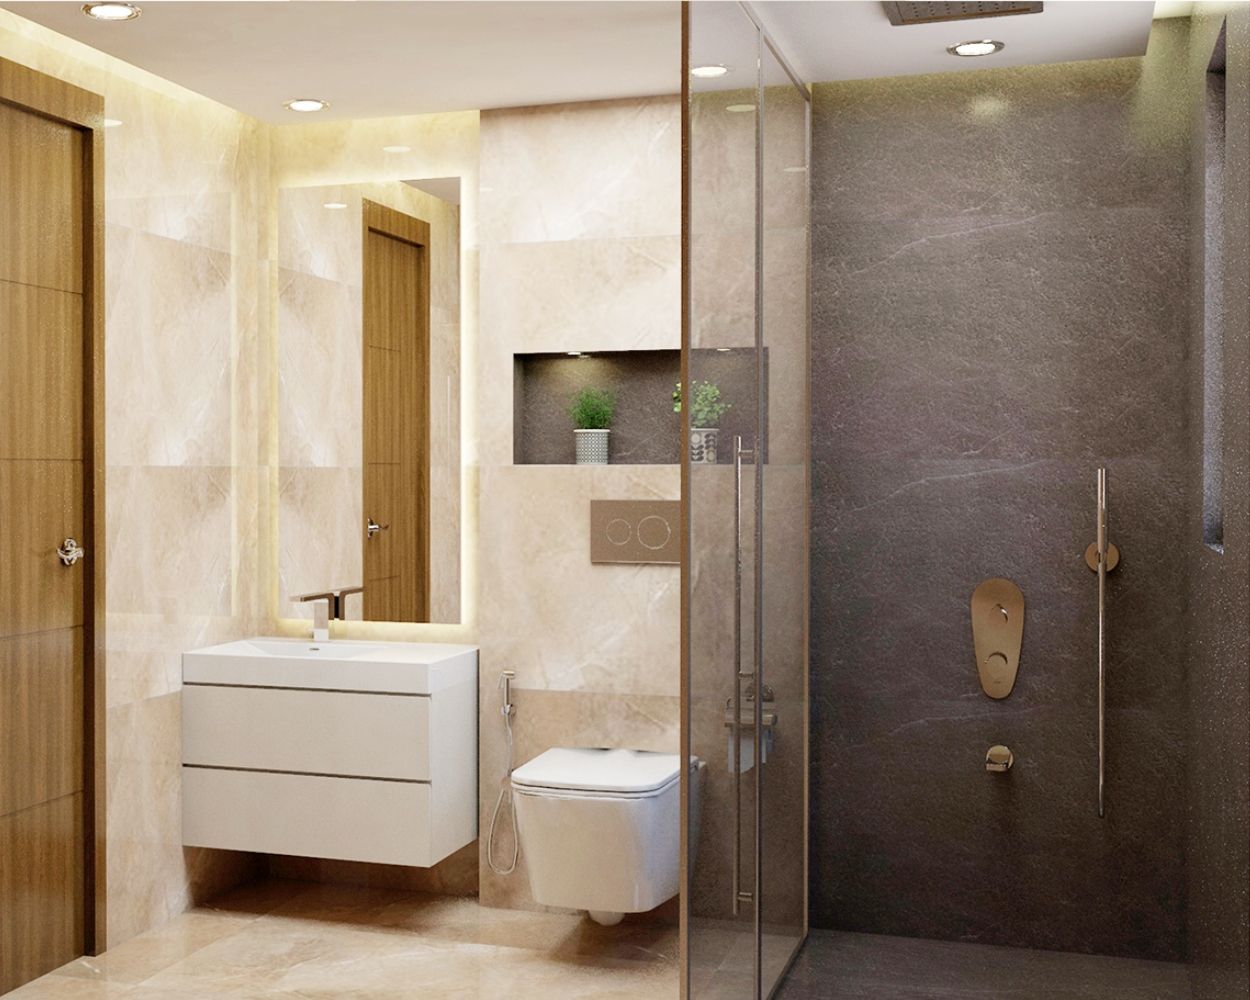 Contemporary Grey And Beige Bathroom Design With Laminated Vanity Unit